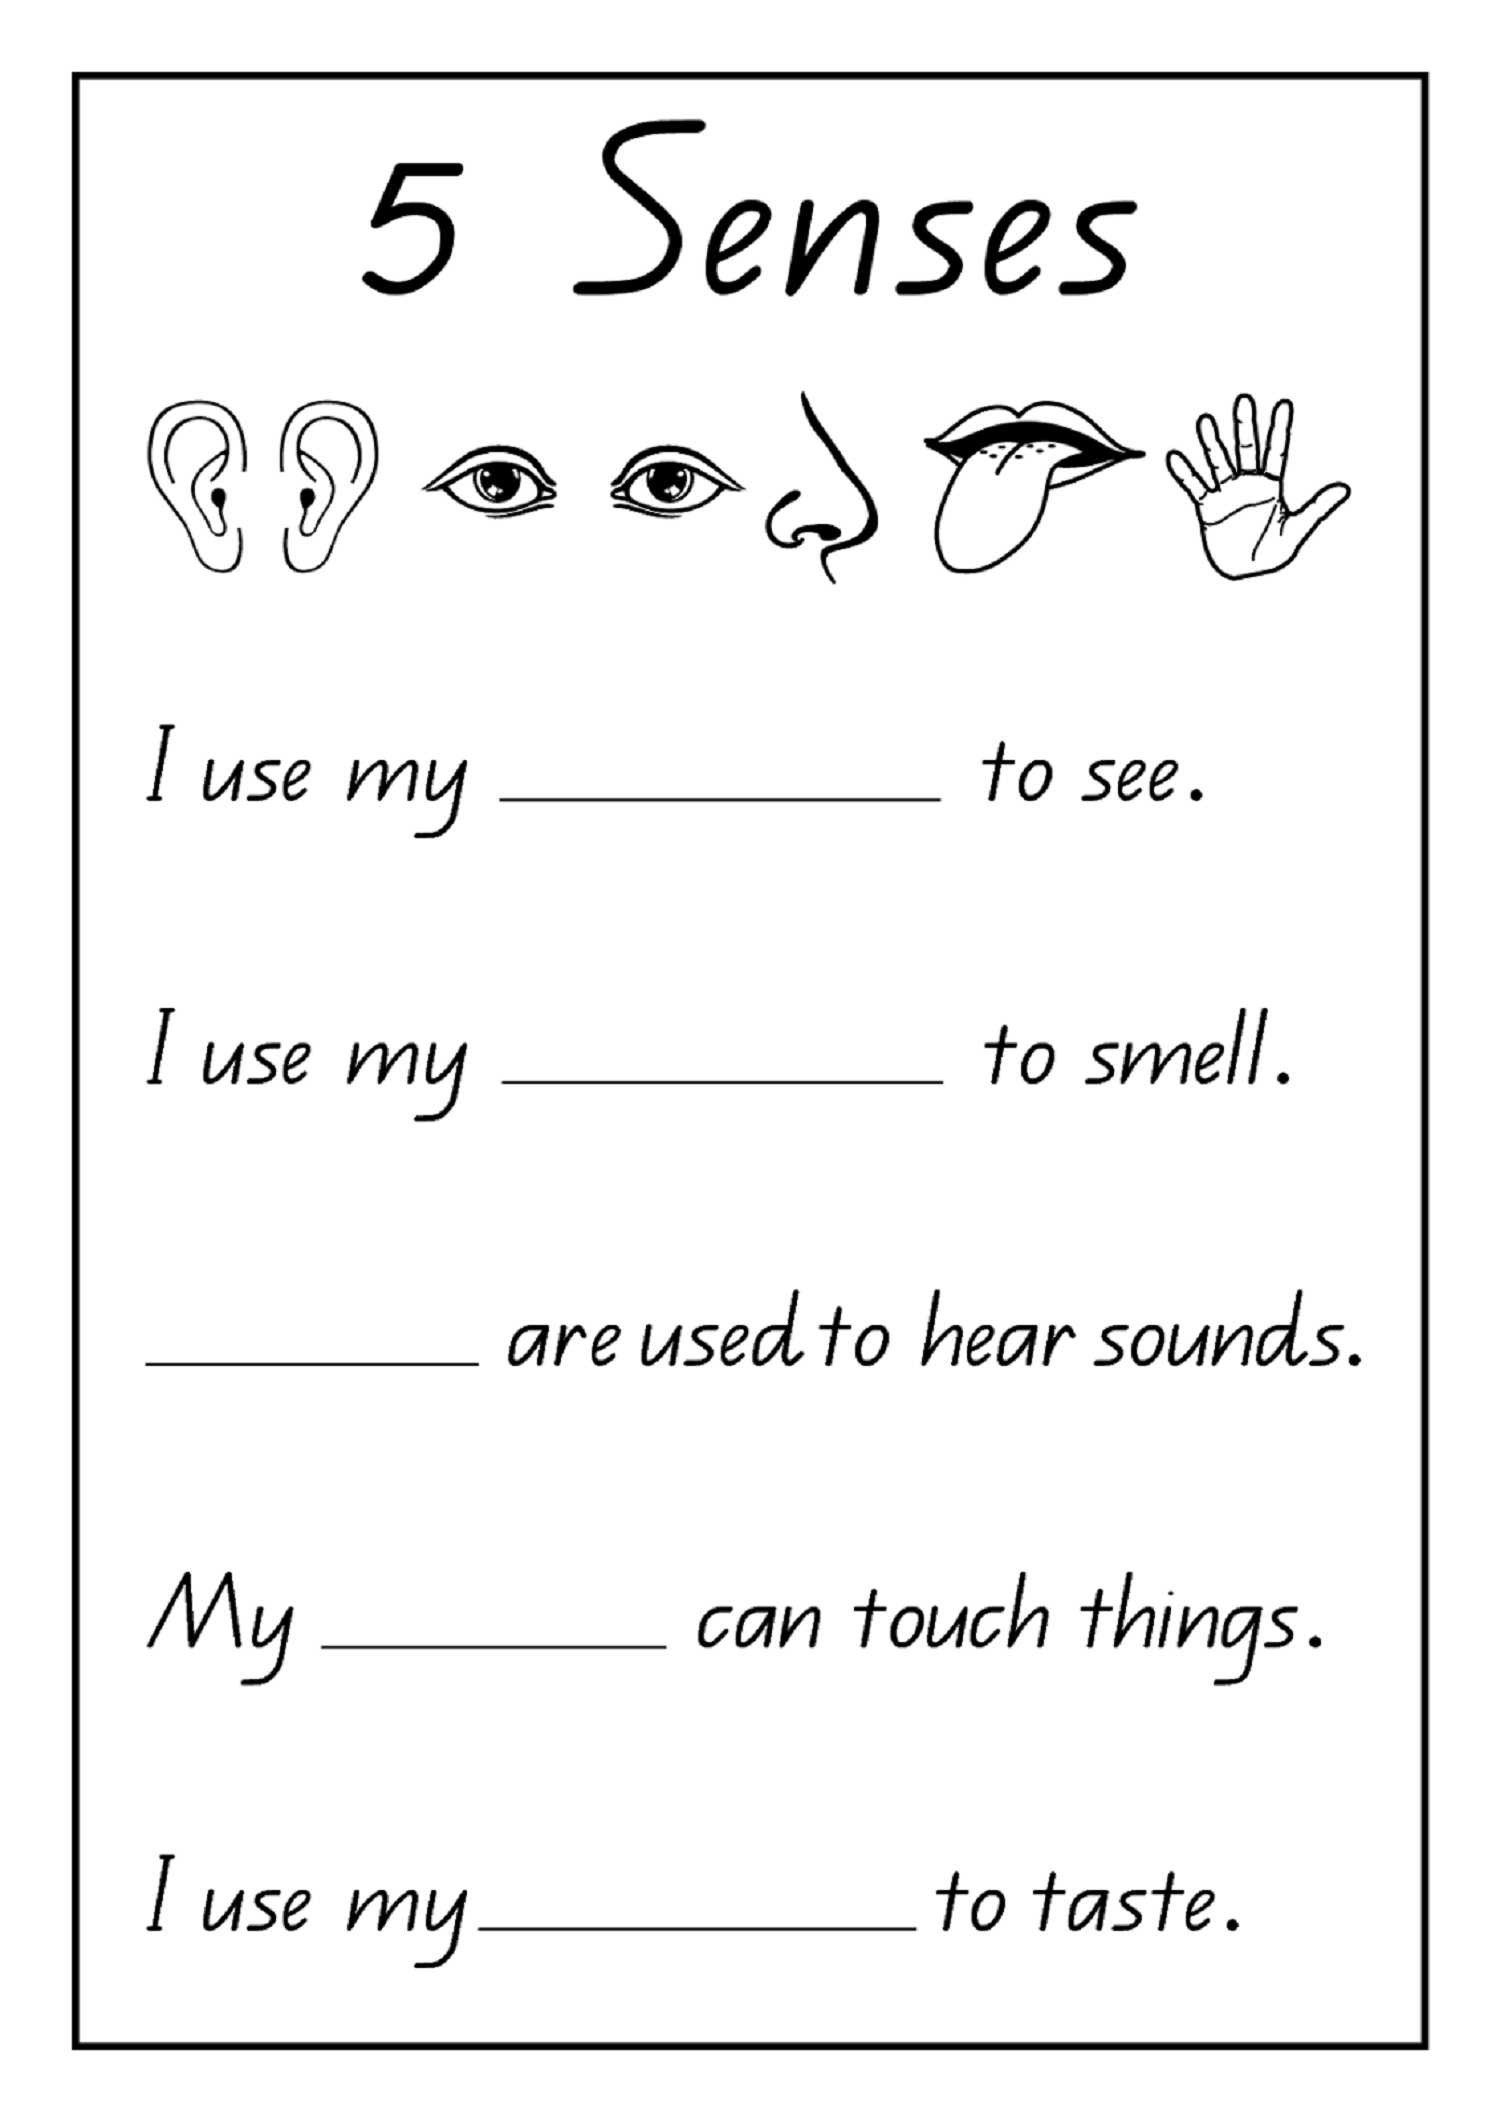 Esl Worksheets for Beginners Adults as Well as Grade 1 Worksheets for Children Learning Exercise